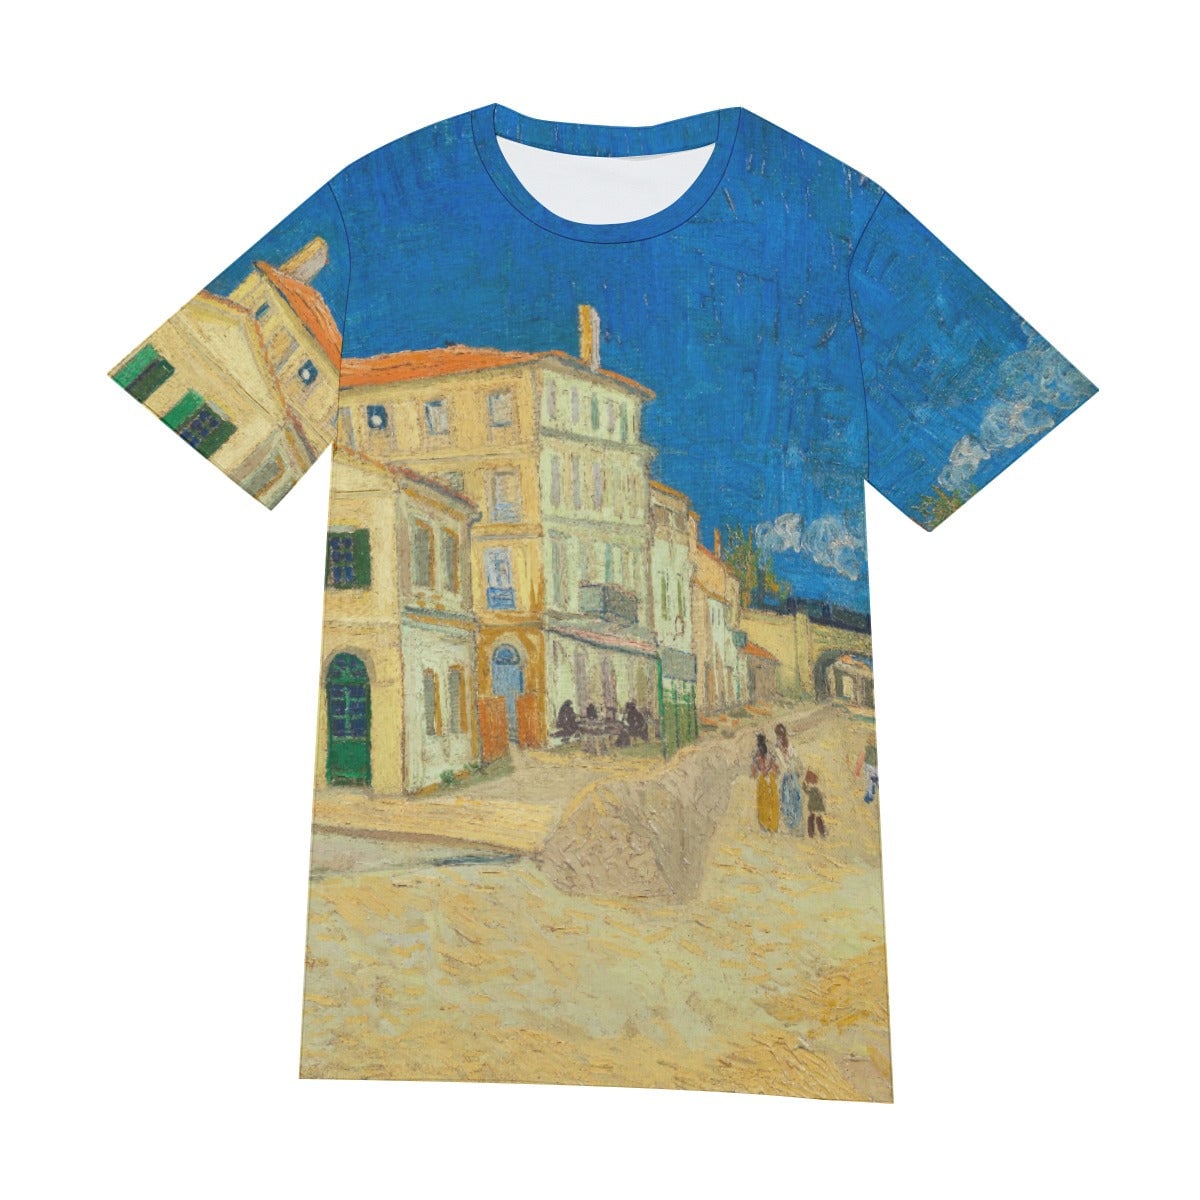 Vincent van Gogh’s The Yellow House T-Shirt